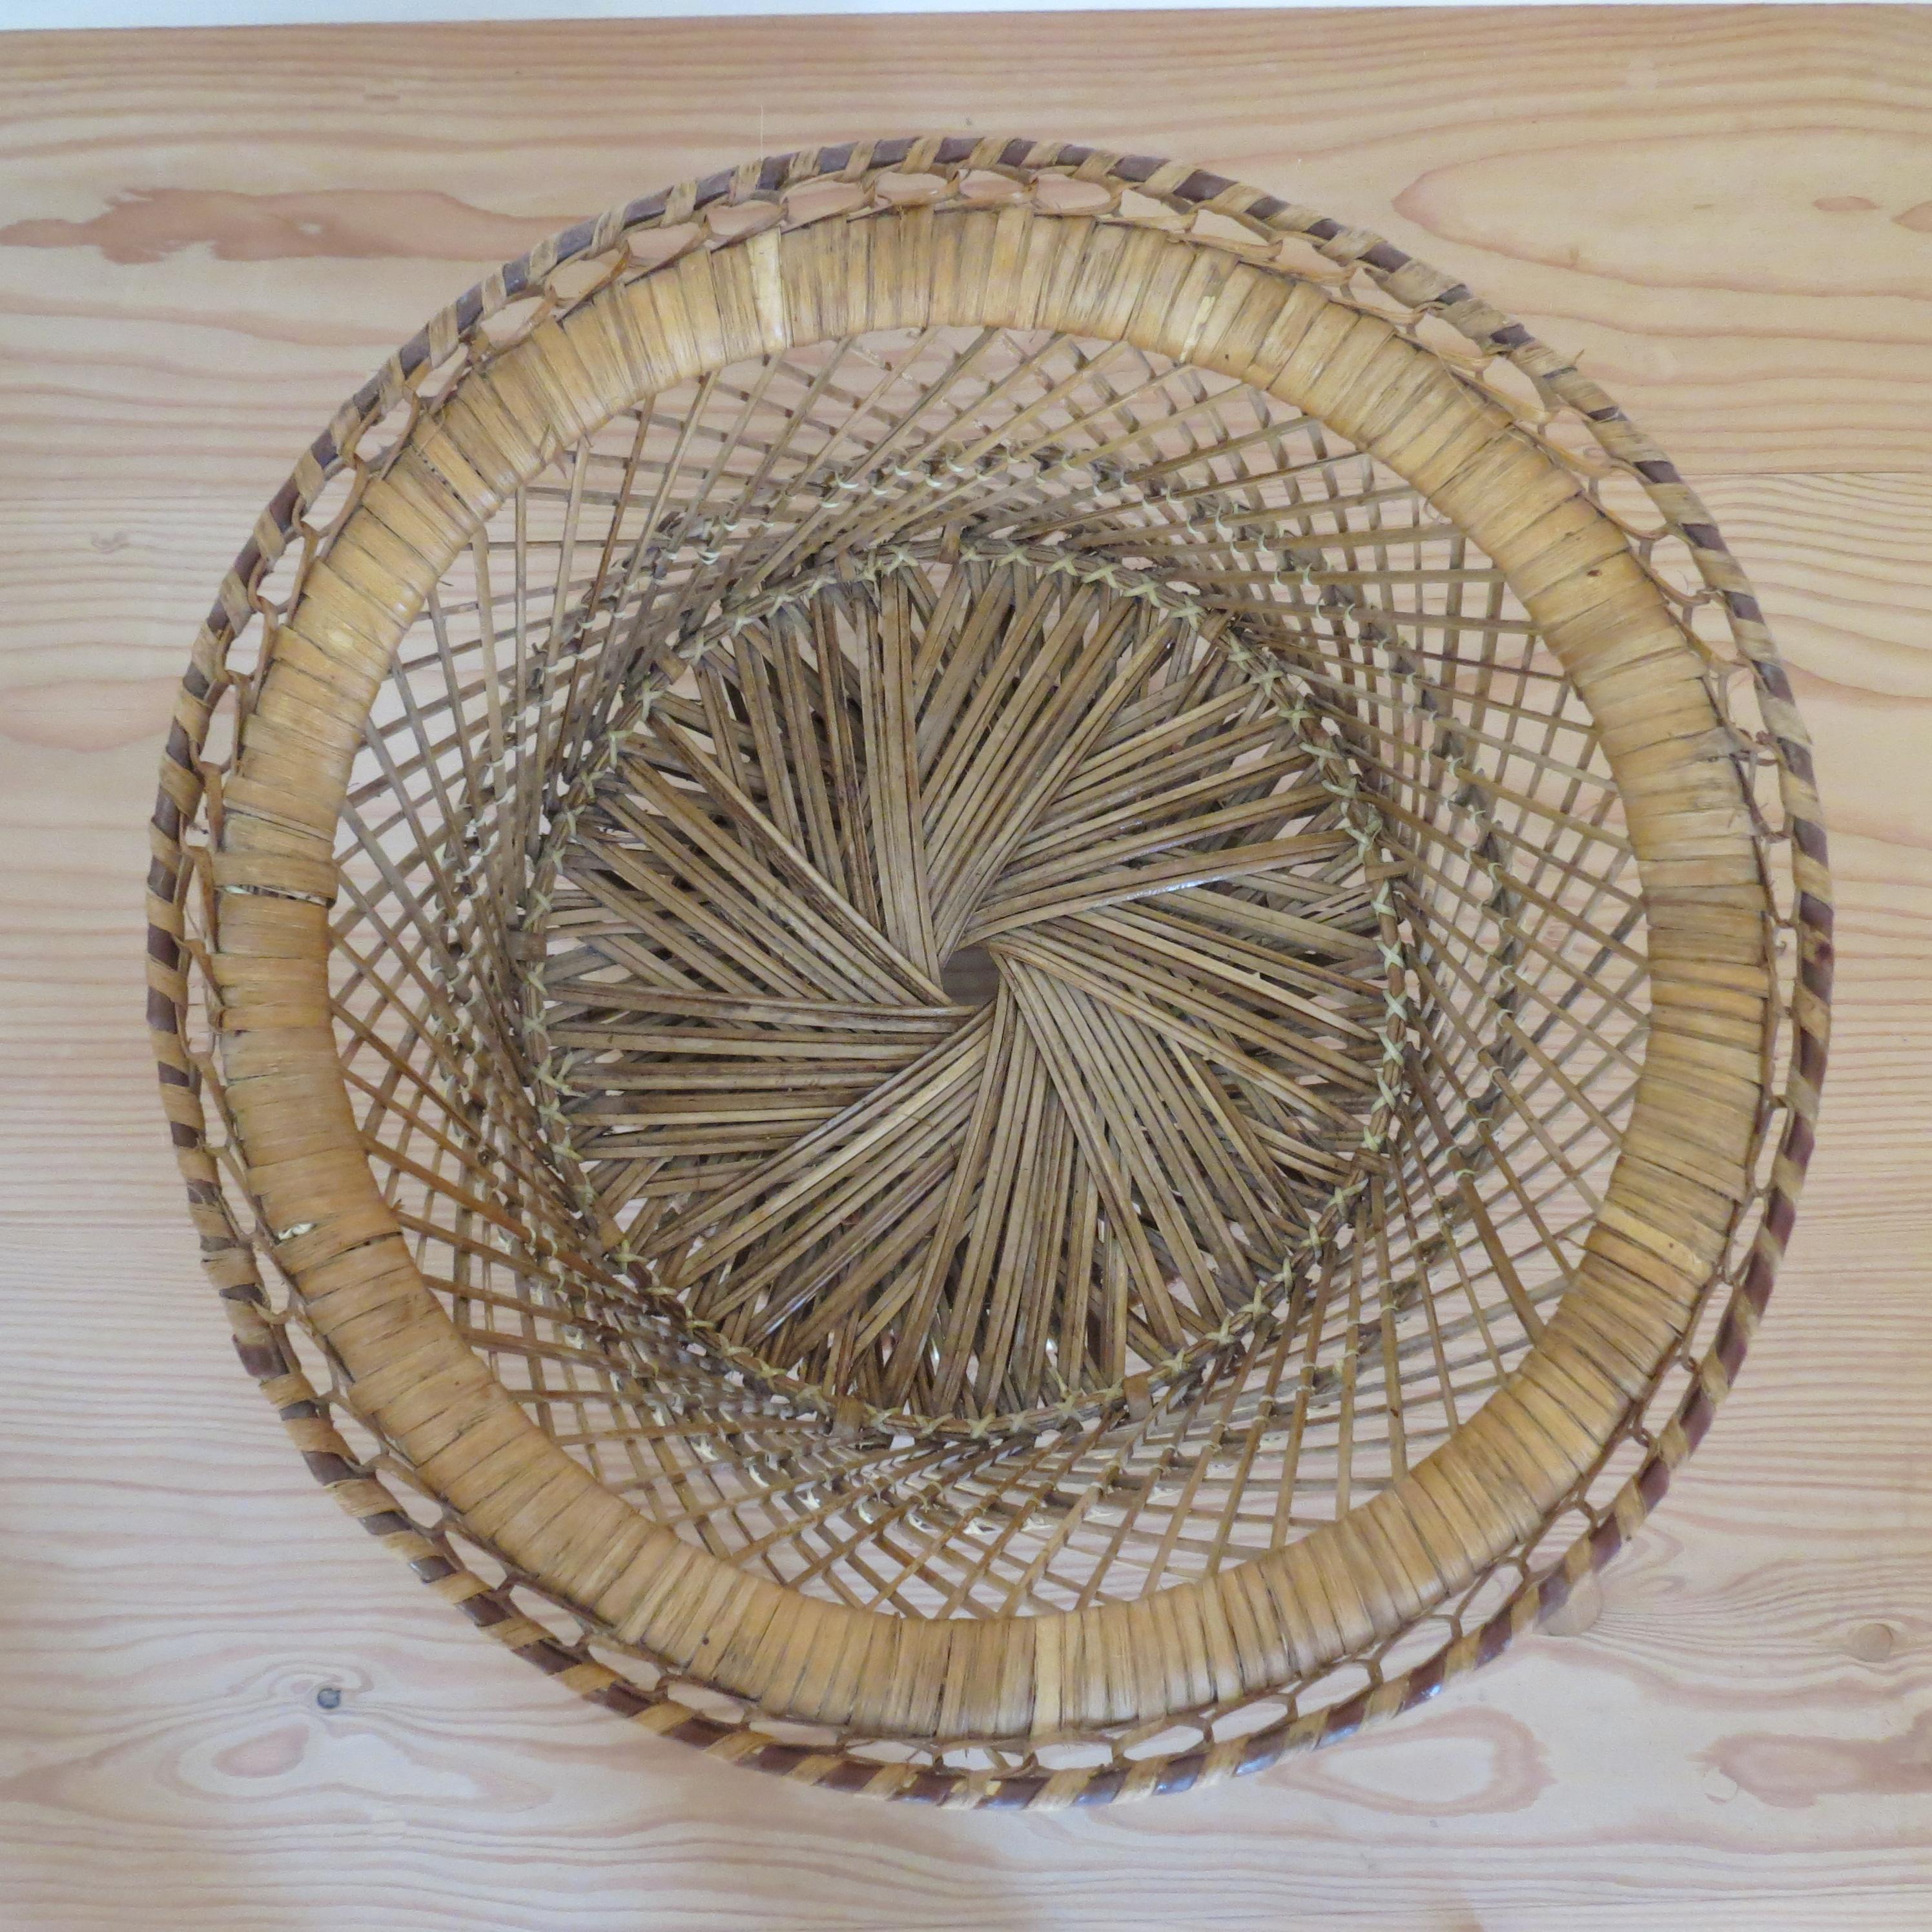 Wonderful wicker rattan plant holder from the 1970s. Nice detailed wicker work.
In good vintage condition

Wonderful wicker rattan plant holder from the 1970s. Nice detailed wicker work.
In good vintage condition

